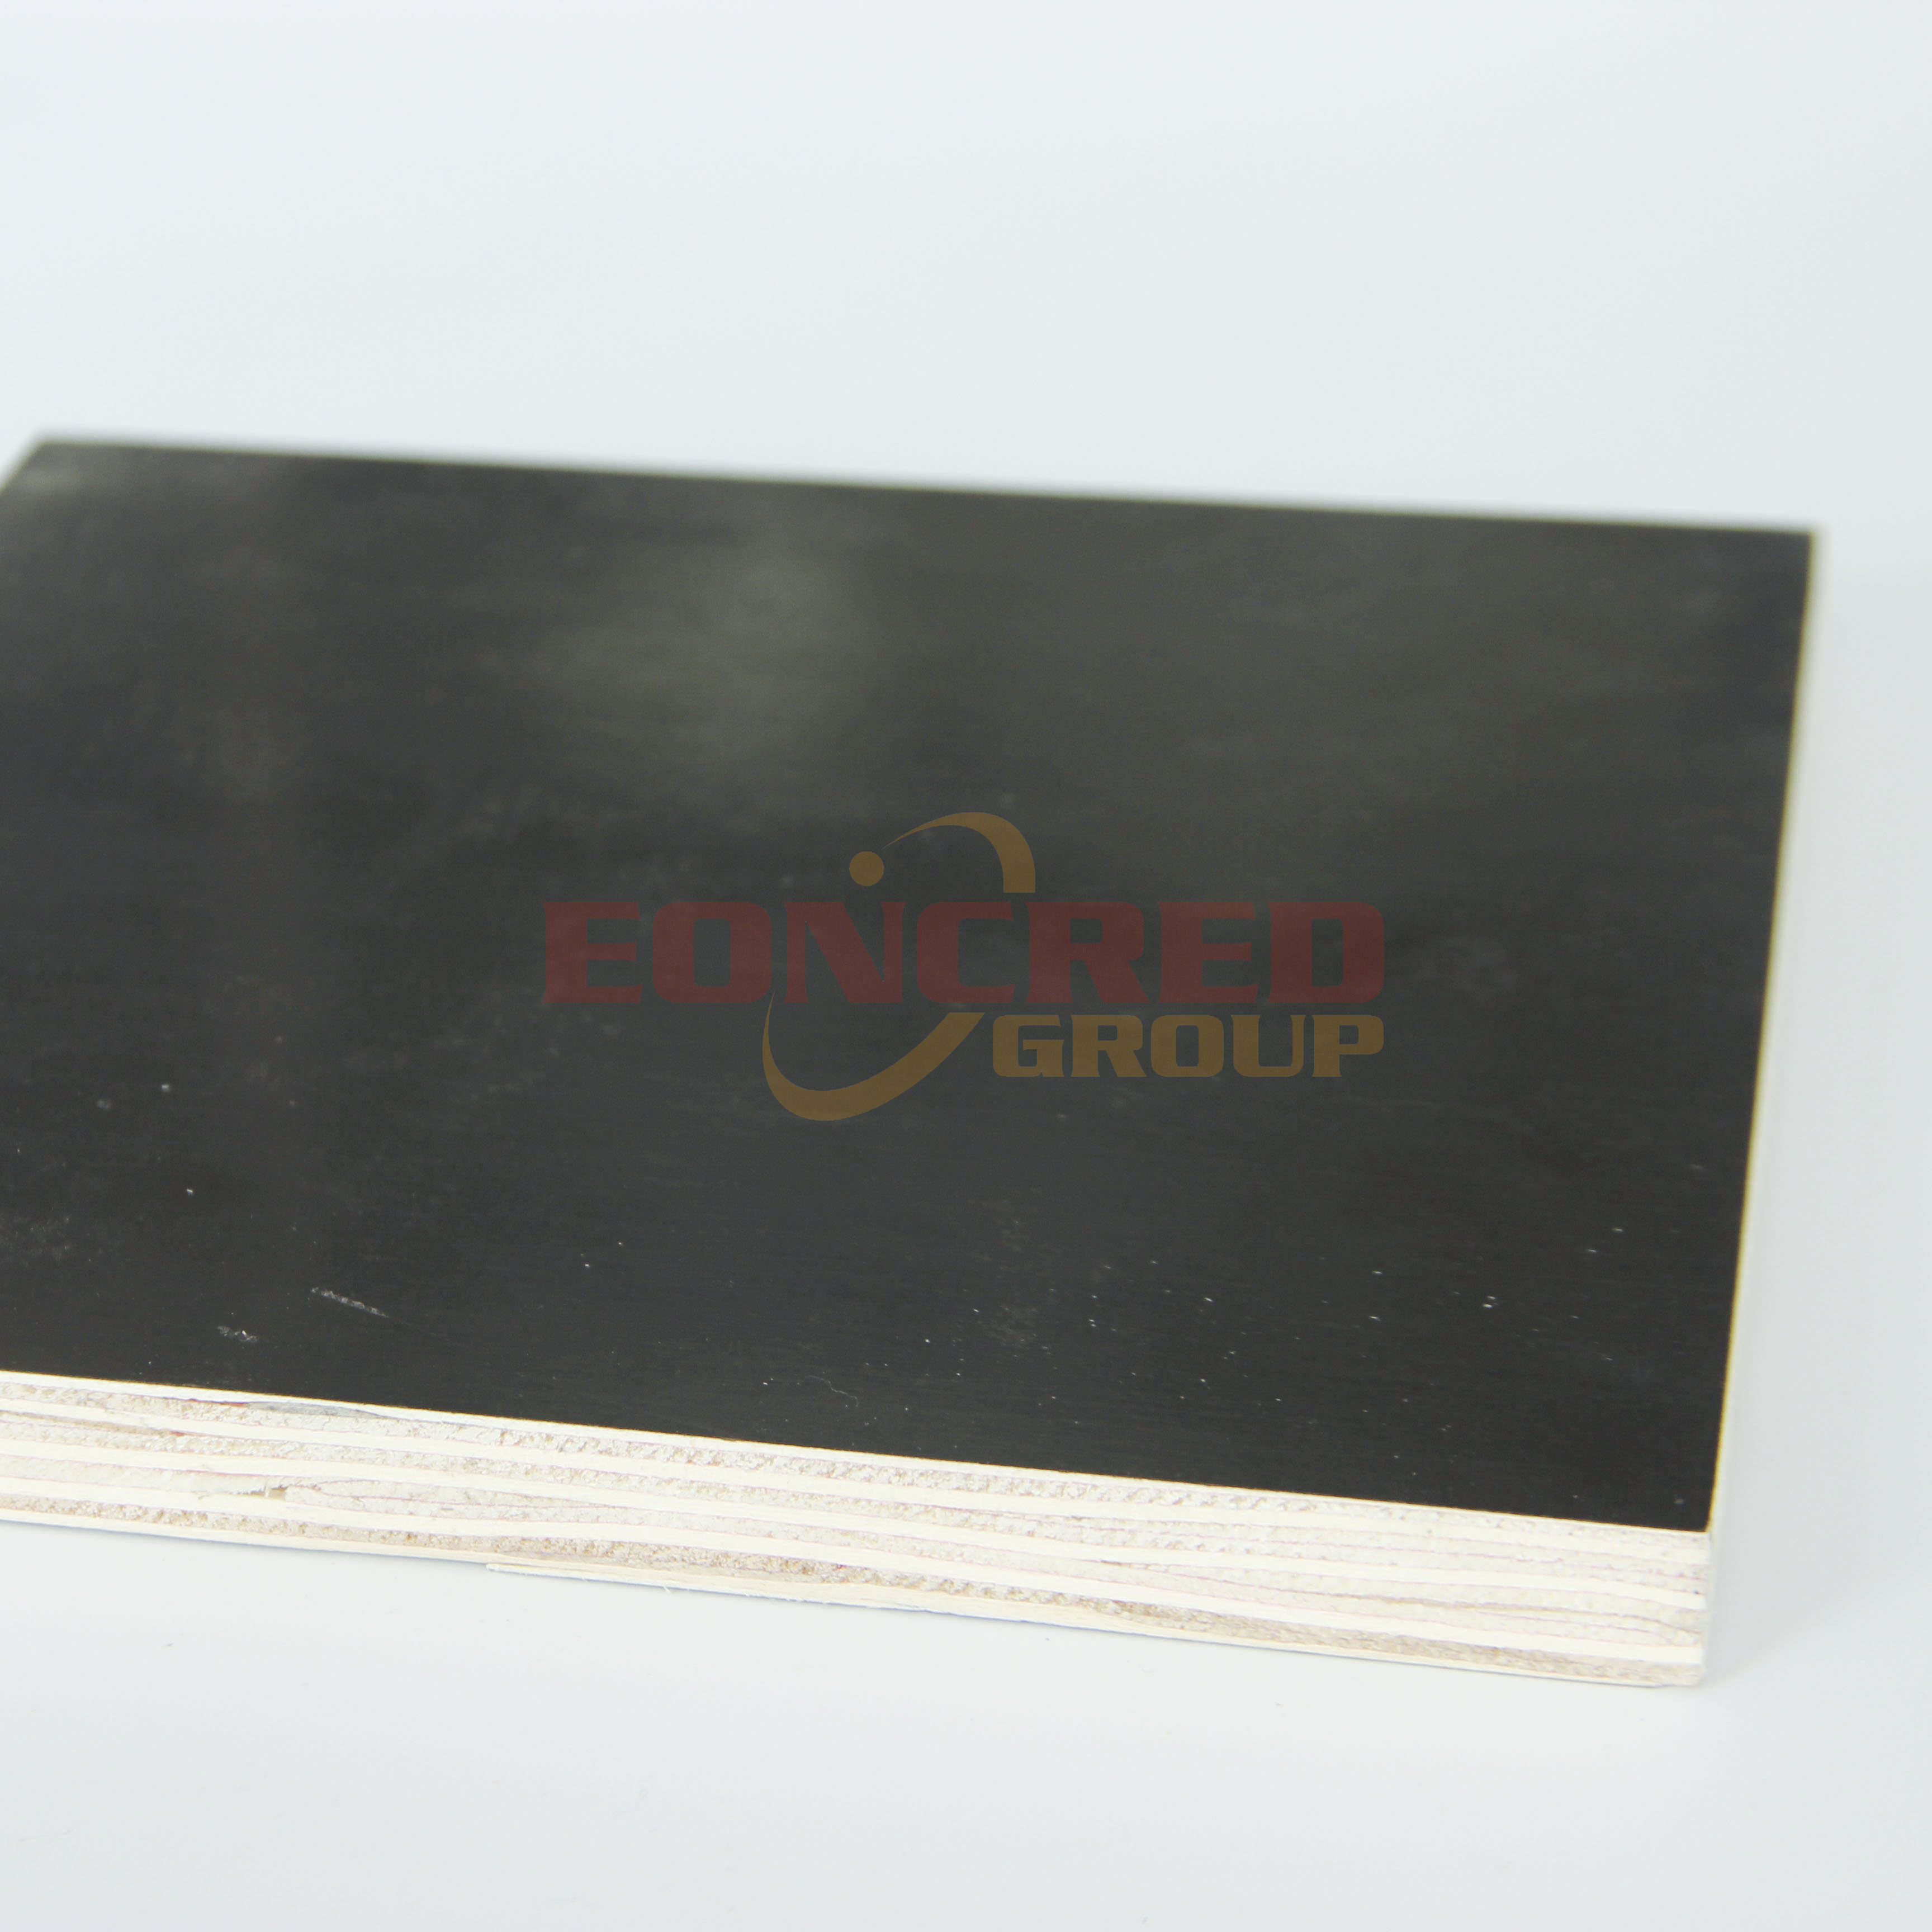 Black Brown Furniture Grade Film Faced Plywood For Construction